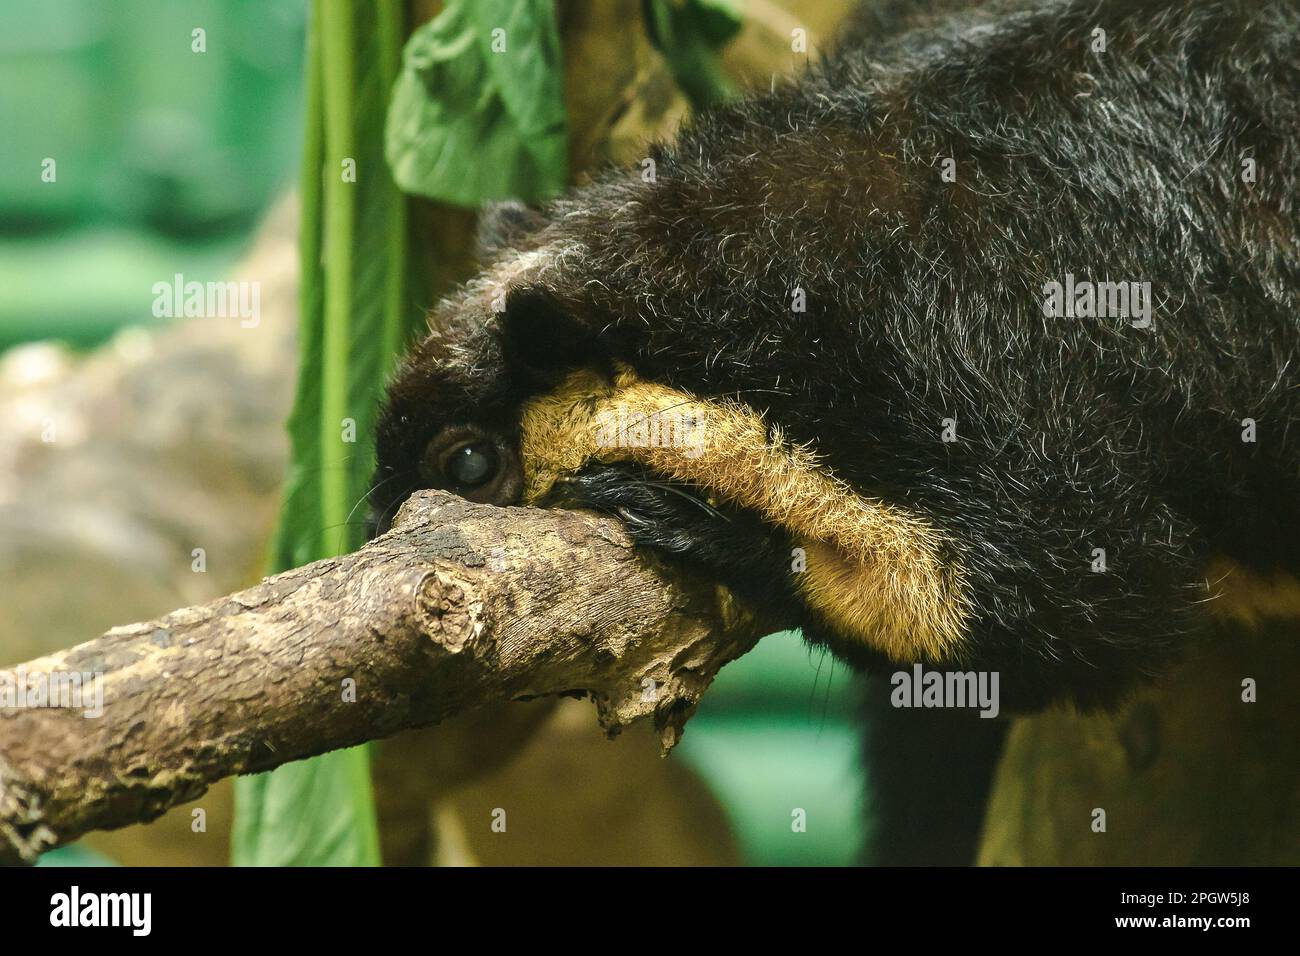 The Black Giant Squirrel was lying on a large branch. Black Giant Squirrel (Ratufa bicolor) is a large squirrel. The feathers on the top of the body a Stock Photo